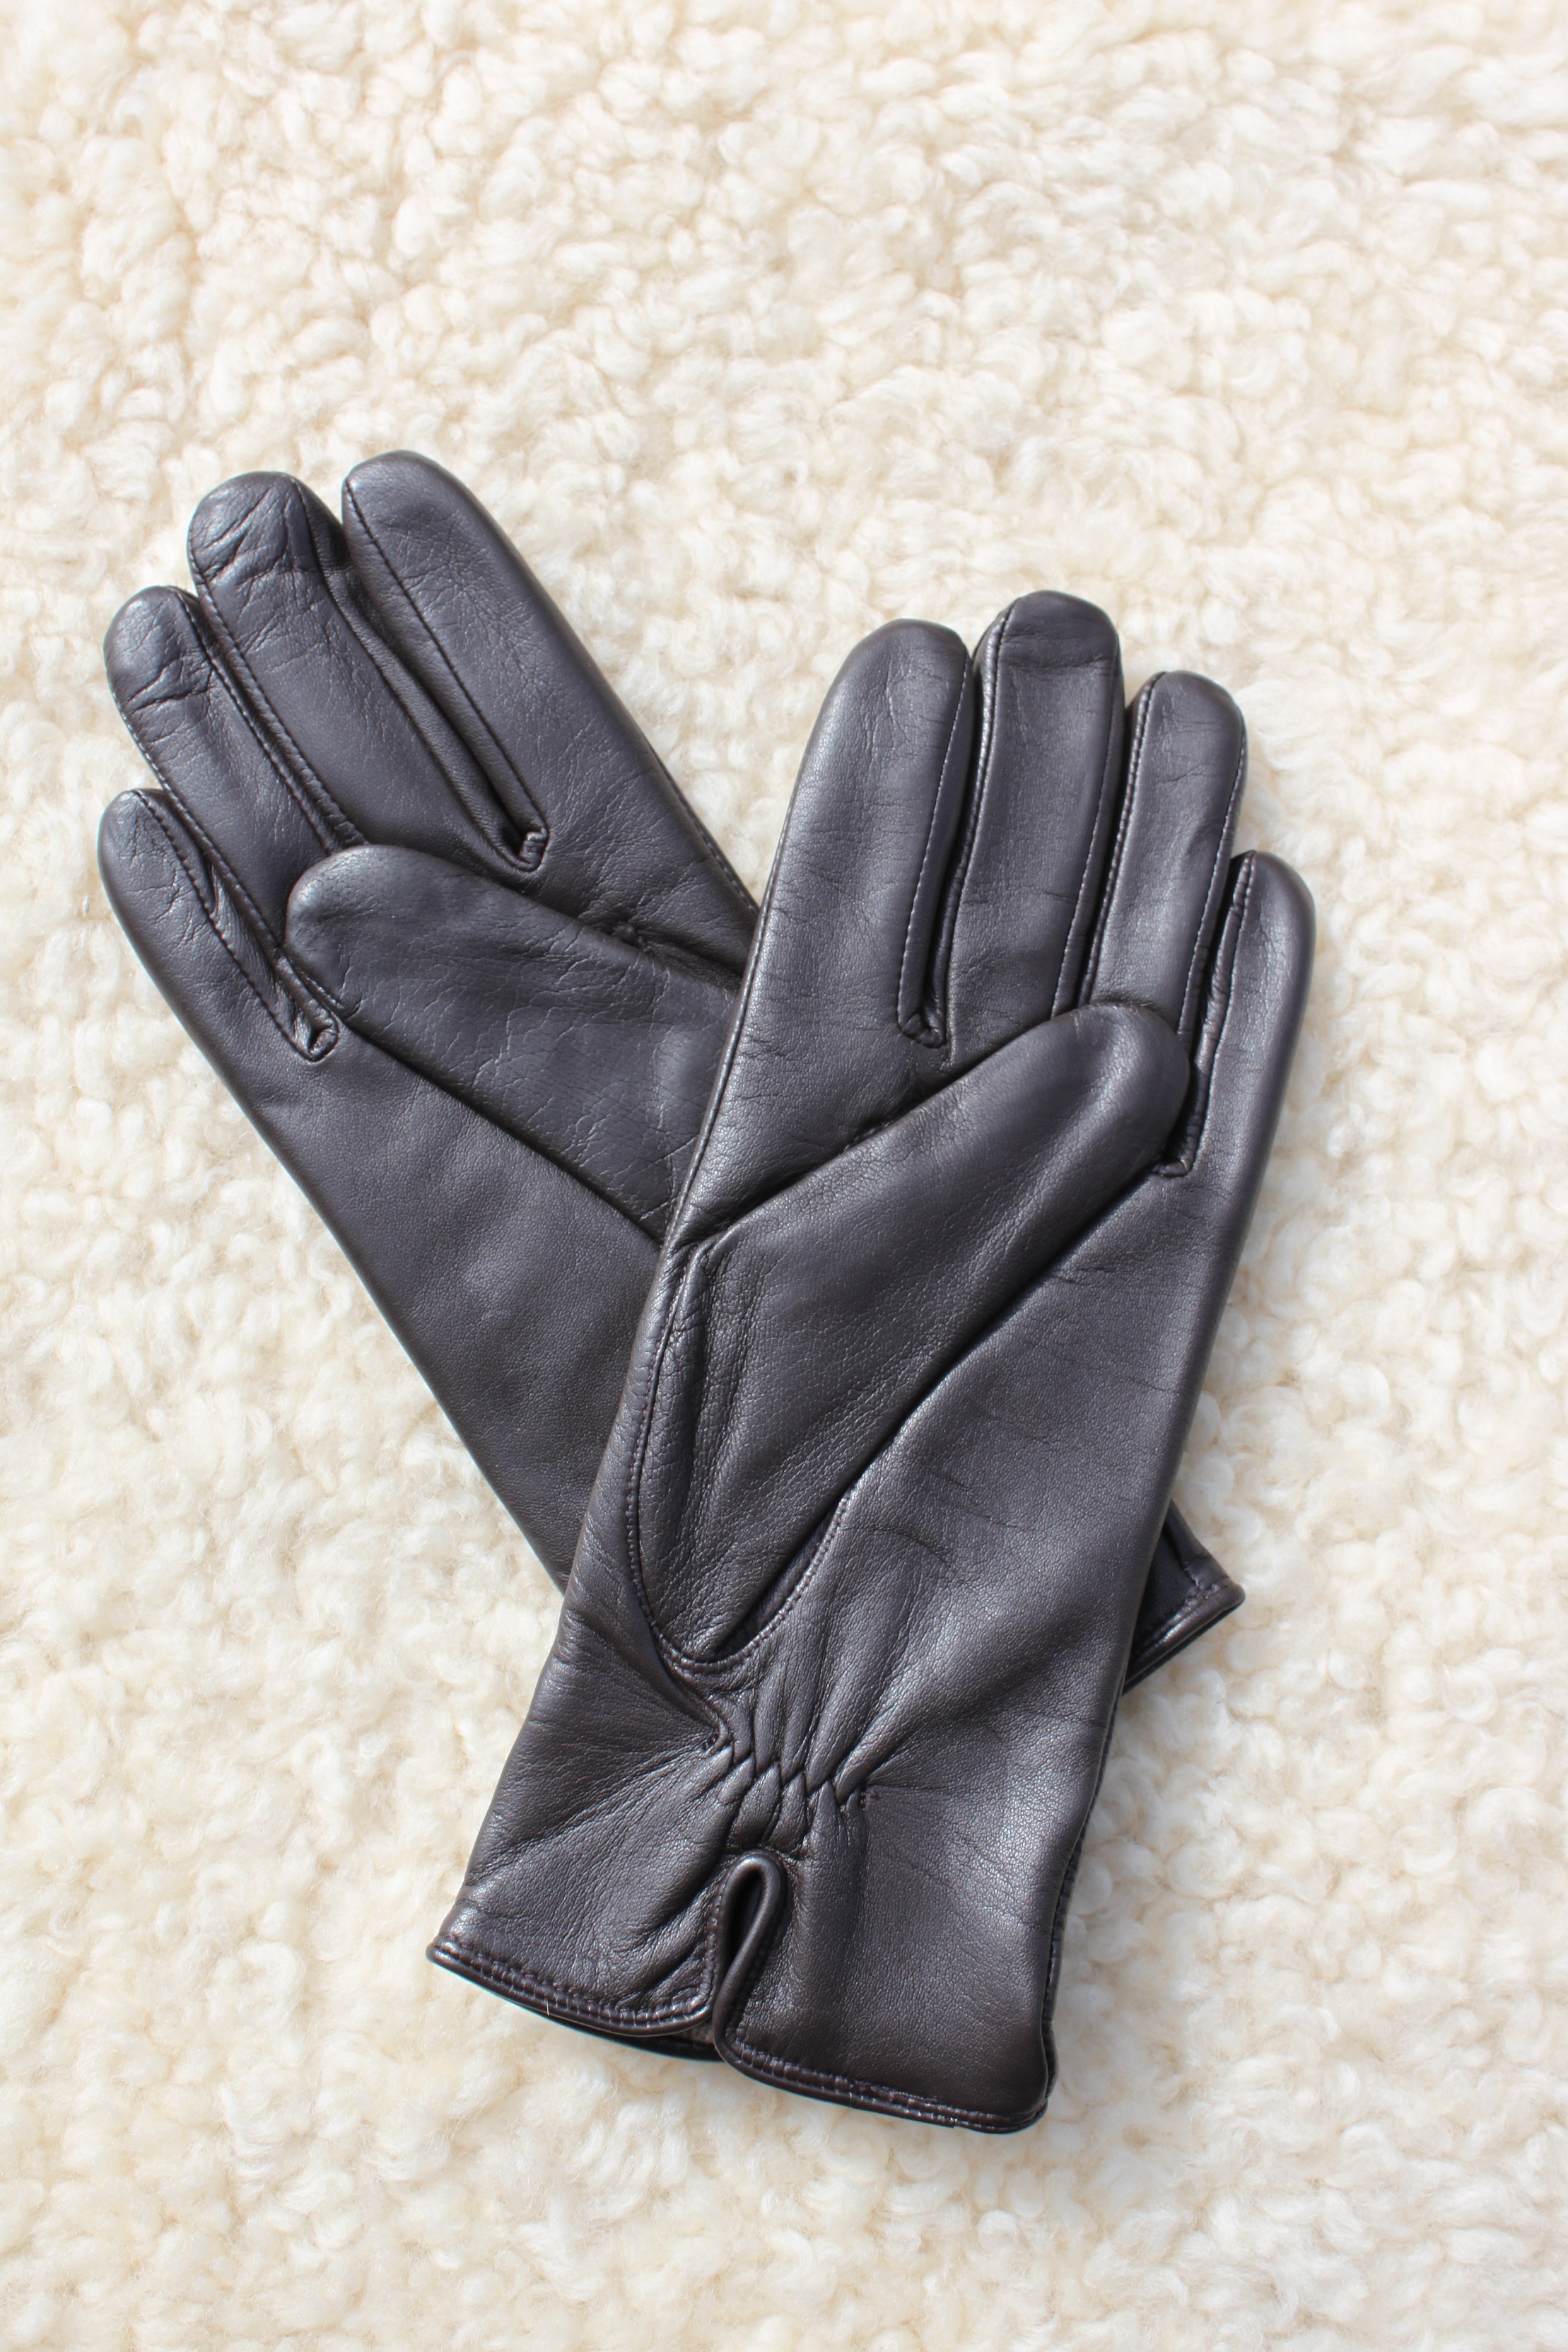 Classic Ladies Leather Gloves - Radford Leather Fashions-Quality ...